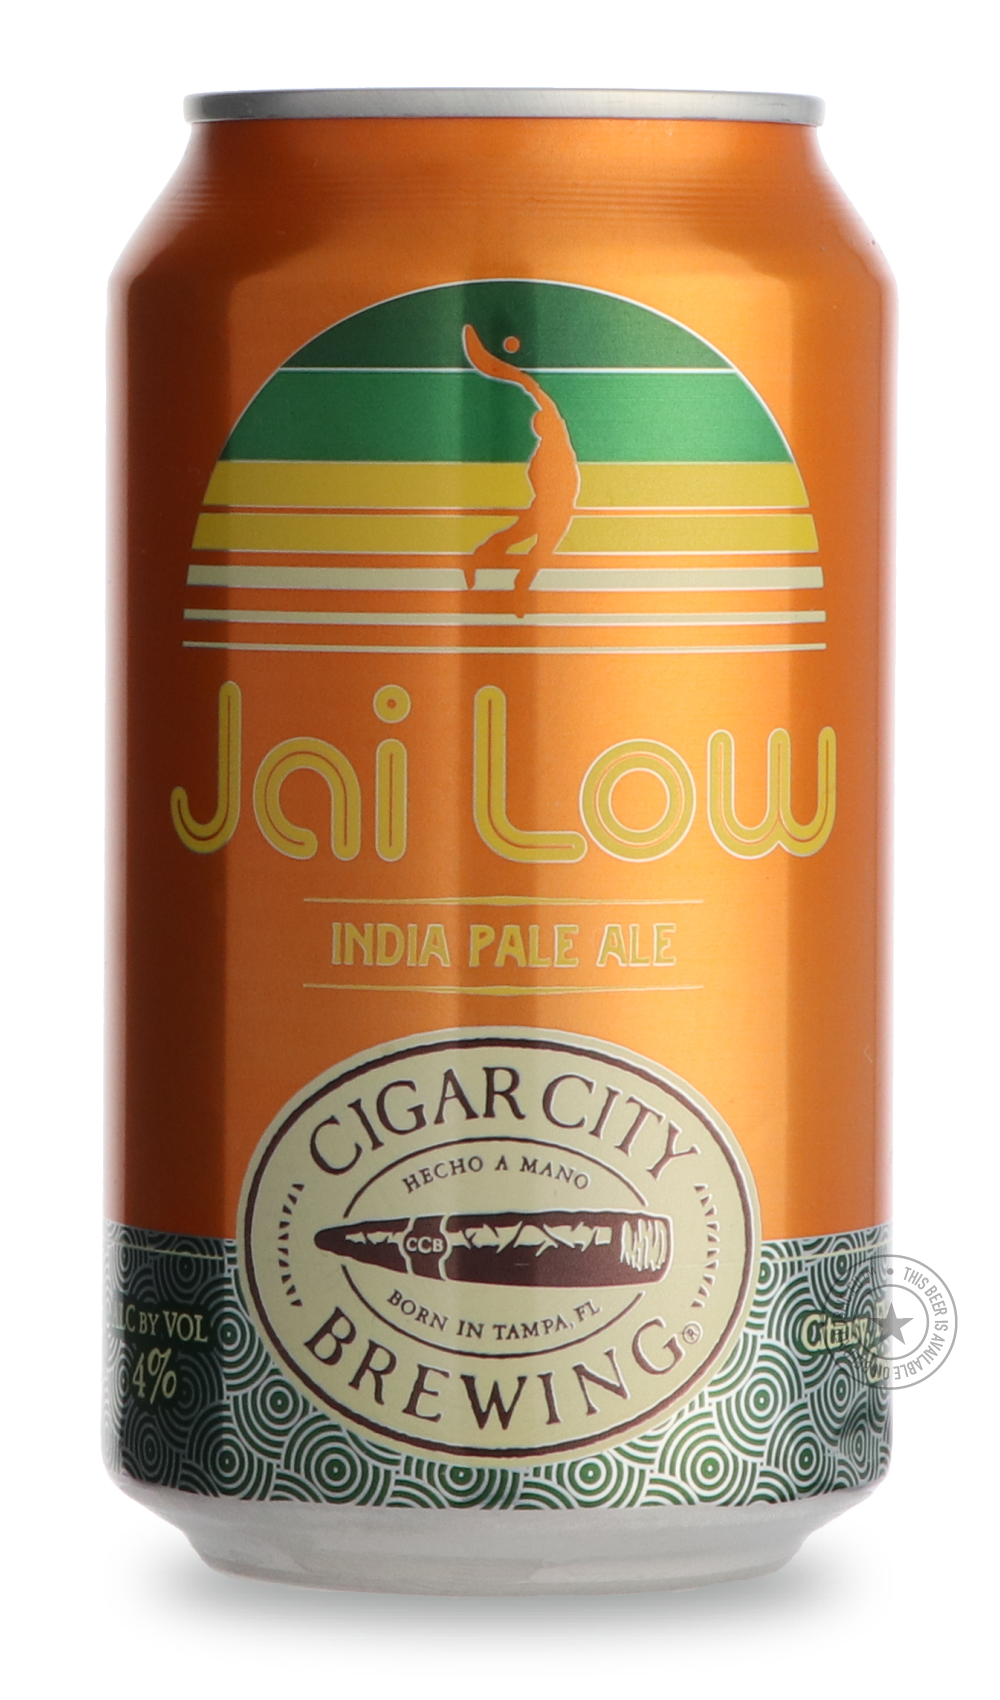 -Cigar City- Jai Low®-IPA- Only @ Beer Republic - The best online beer store for American & Canadian craft beer - Buy beer online from the USA and Canada - Bier online kopen - Amerikaans bier kopen - Craft beer store - Craft beer kopen - Amerikanisch bier kaufen - Bier online kaufen - Acheter biere online - IPA - Stout - Porter - New England IPA - Hazy IPA - Imperial Stout - Barrel Aged - Barrel Aged Imperial Stout - Brown - Dark beer - Blond - Blonde - Pilsner - Lager - Wheat - Weizen - Amber - Barley Wine